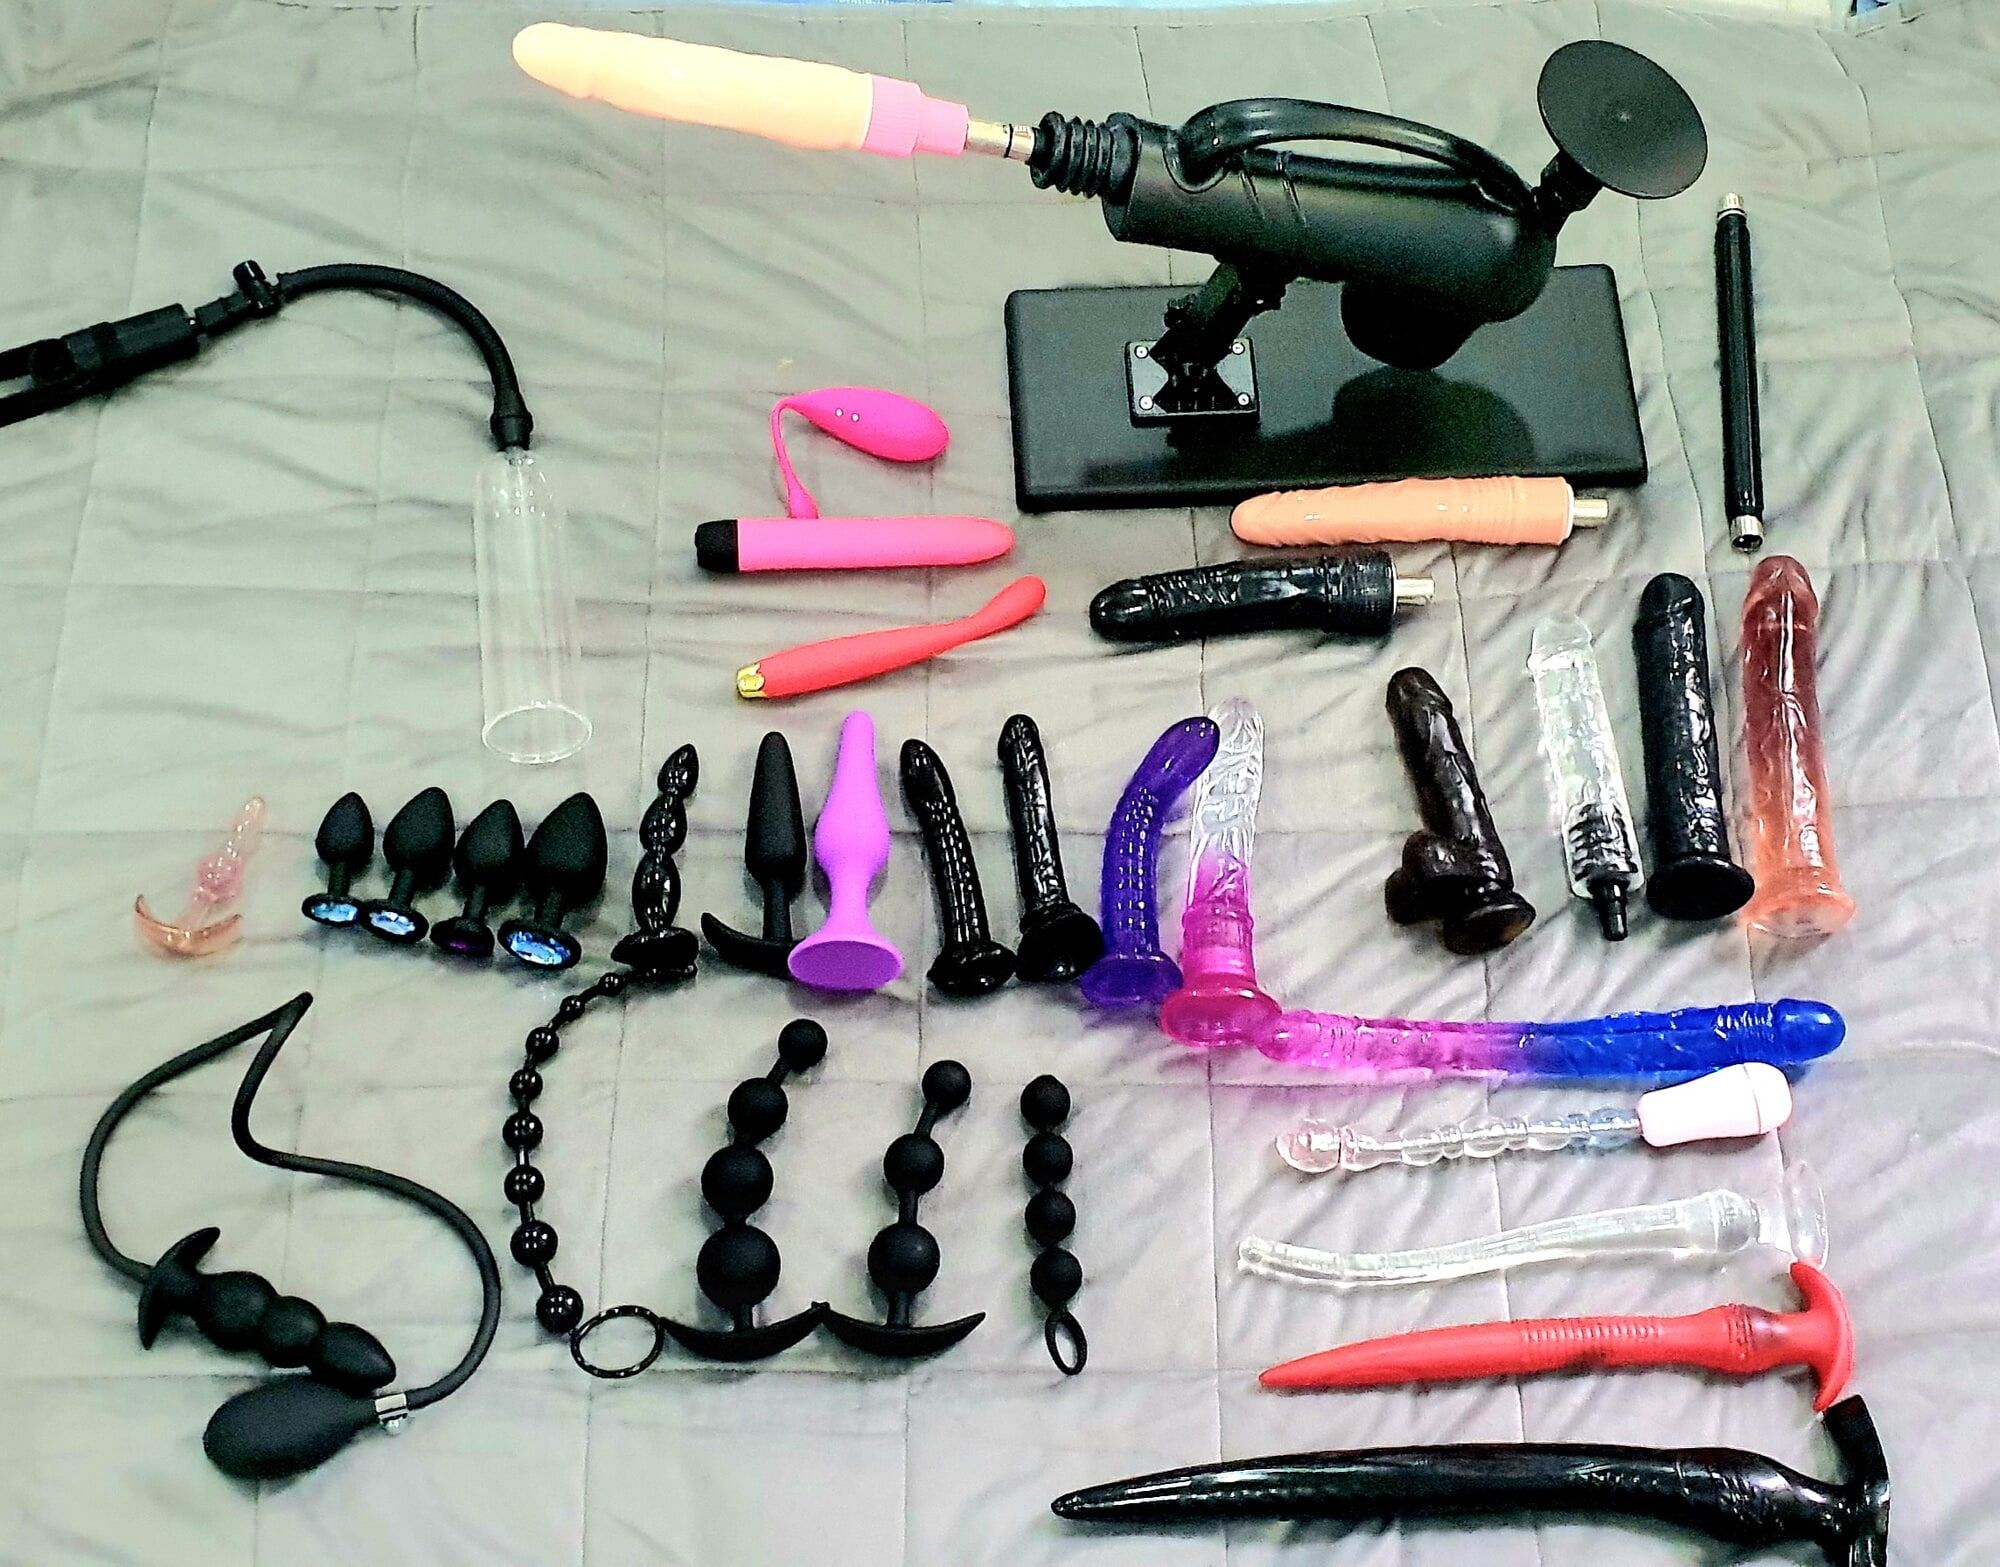 My Toys for sissy training